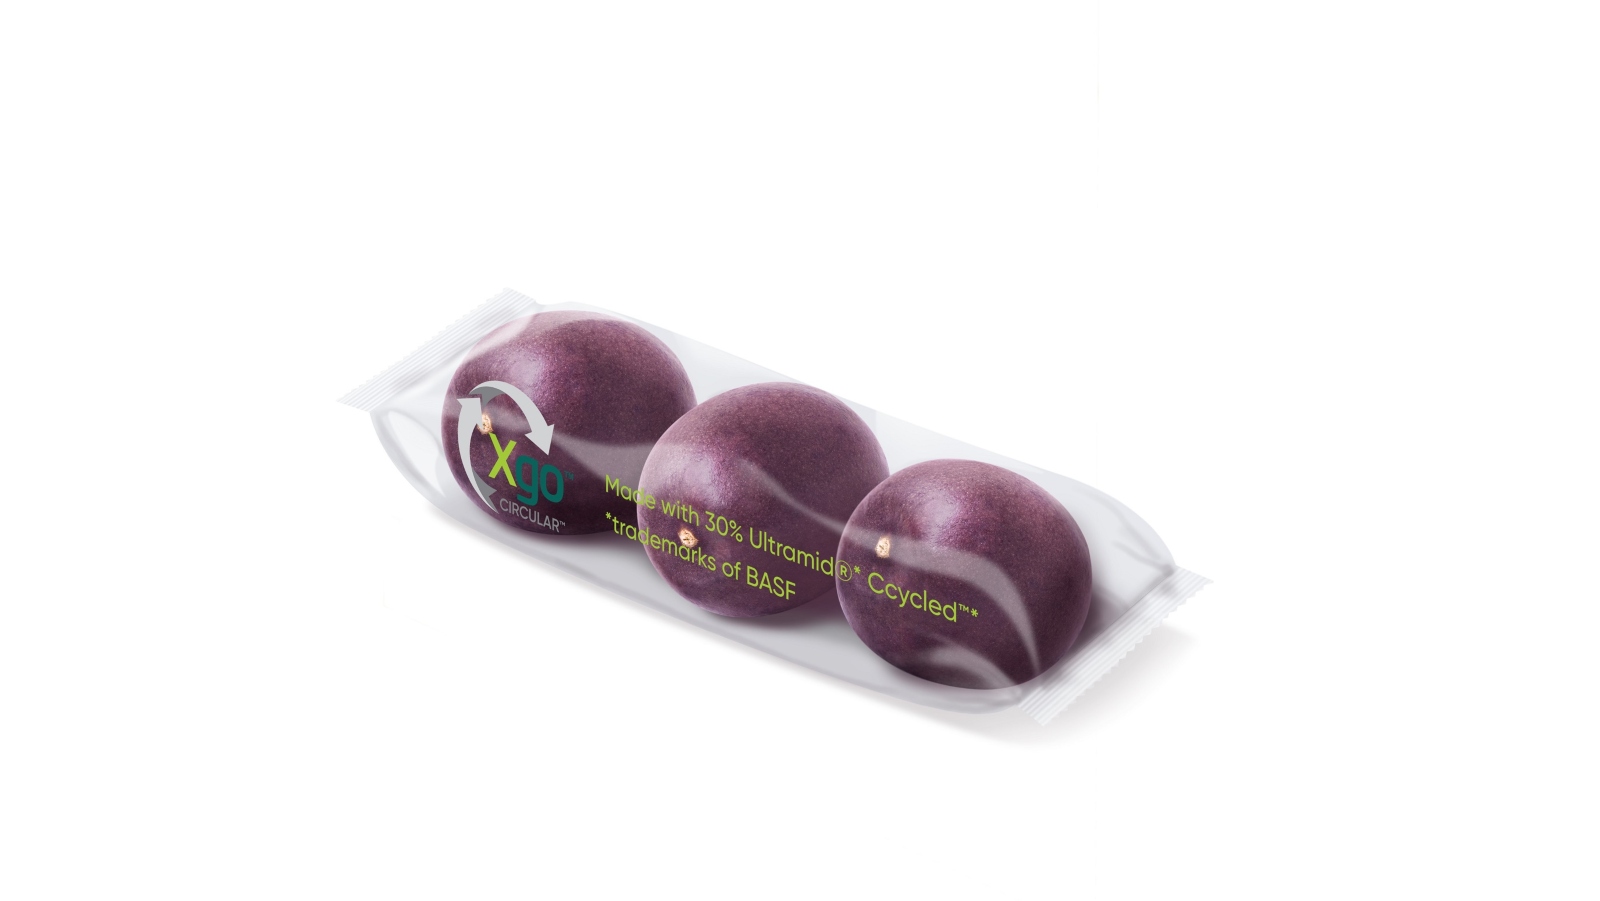 Passionfruit wrapped in Xgo Circular extends shelf life, reducing food waste that causes CO2 emissions. Photo courtesy of StePac